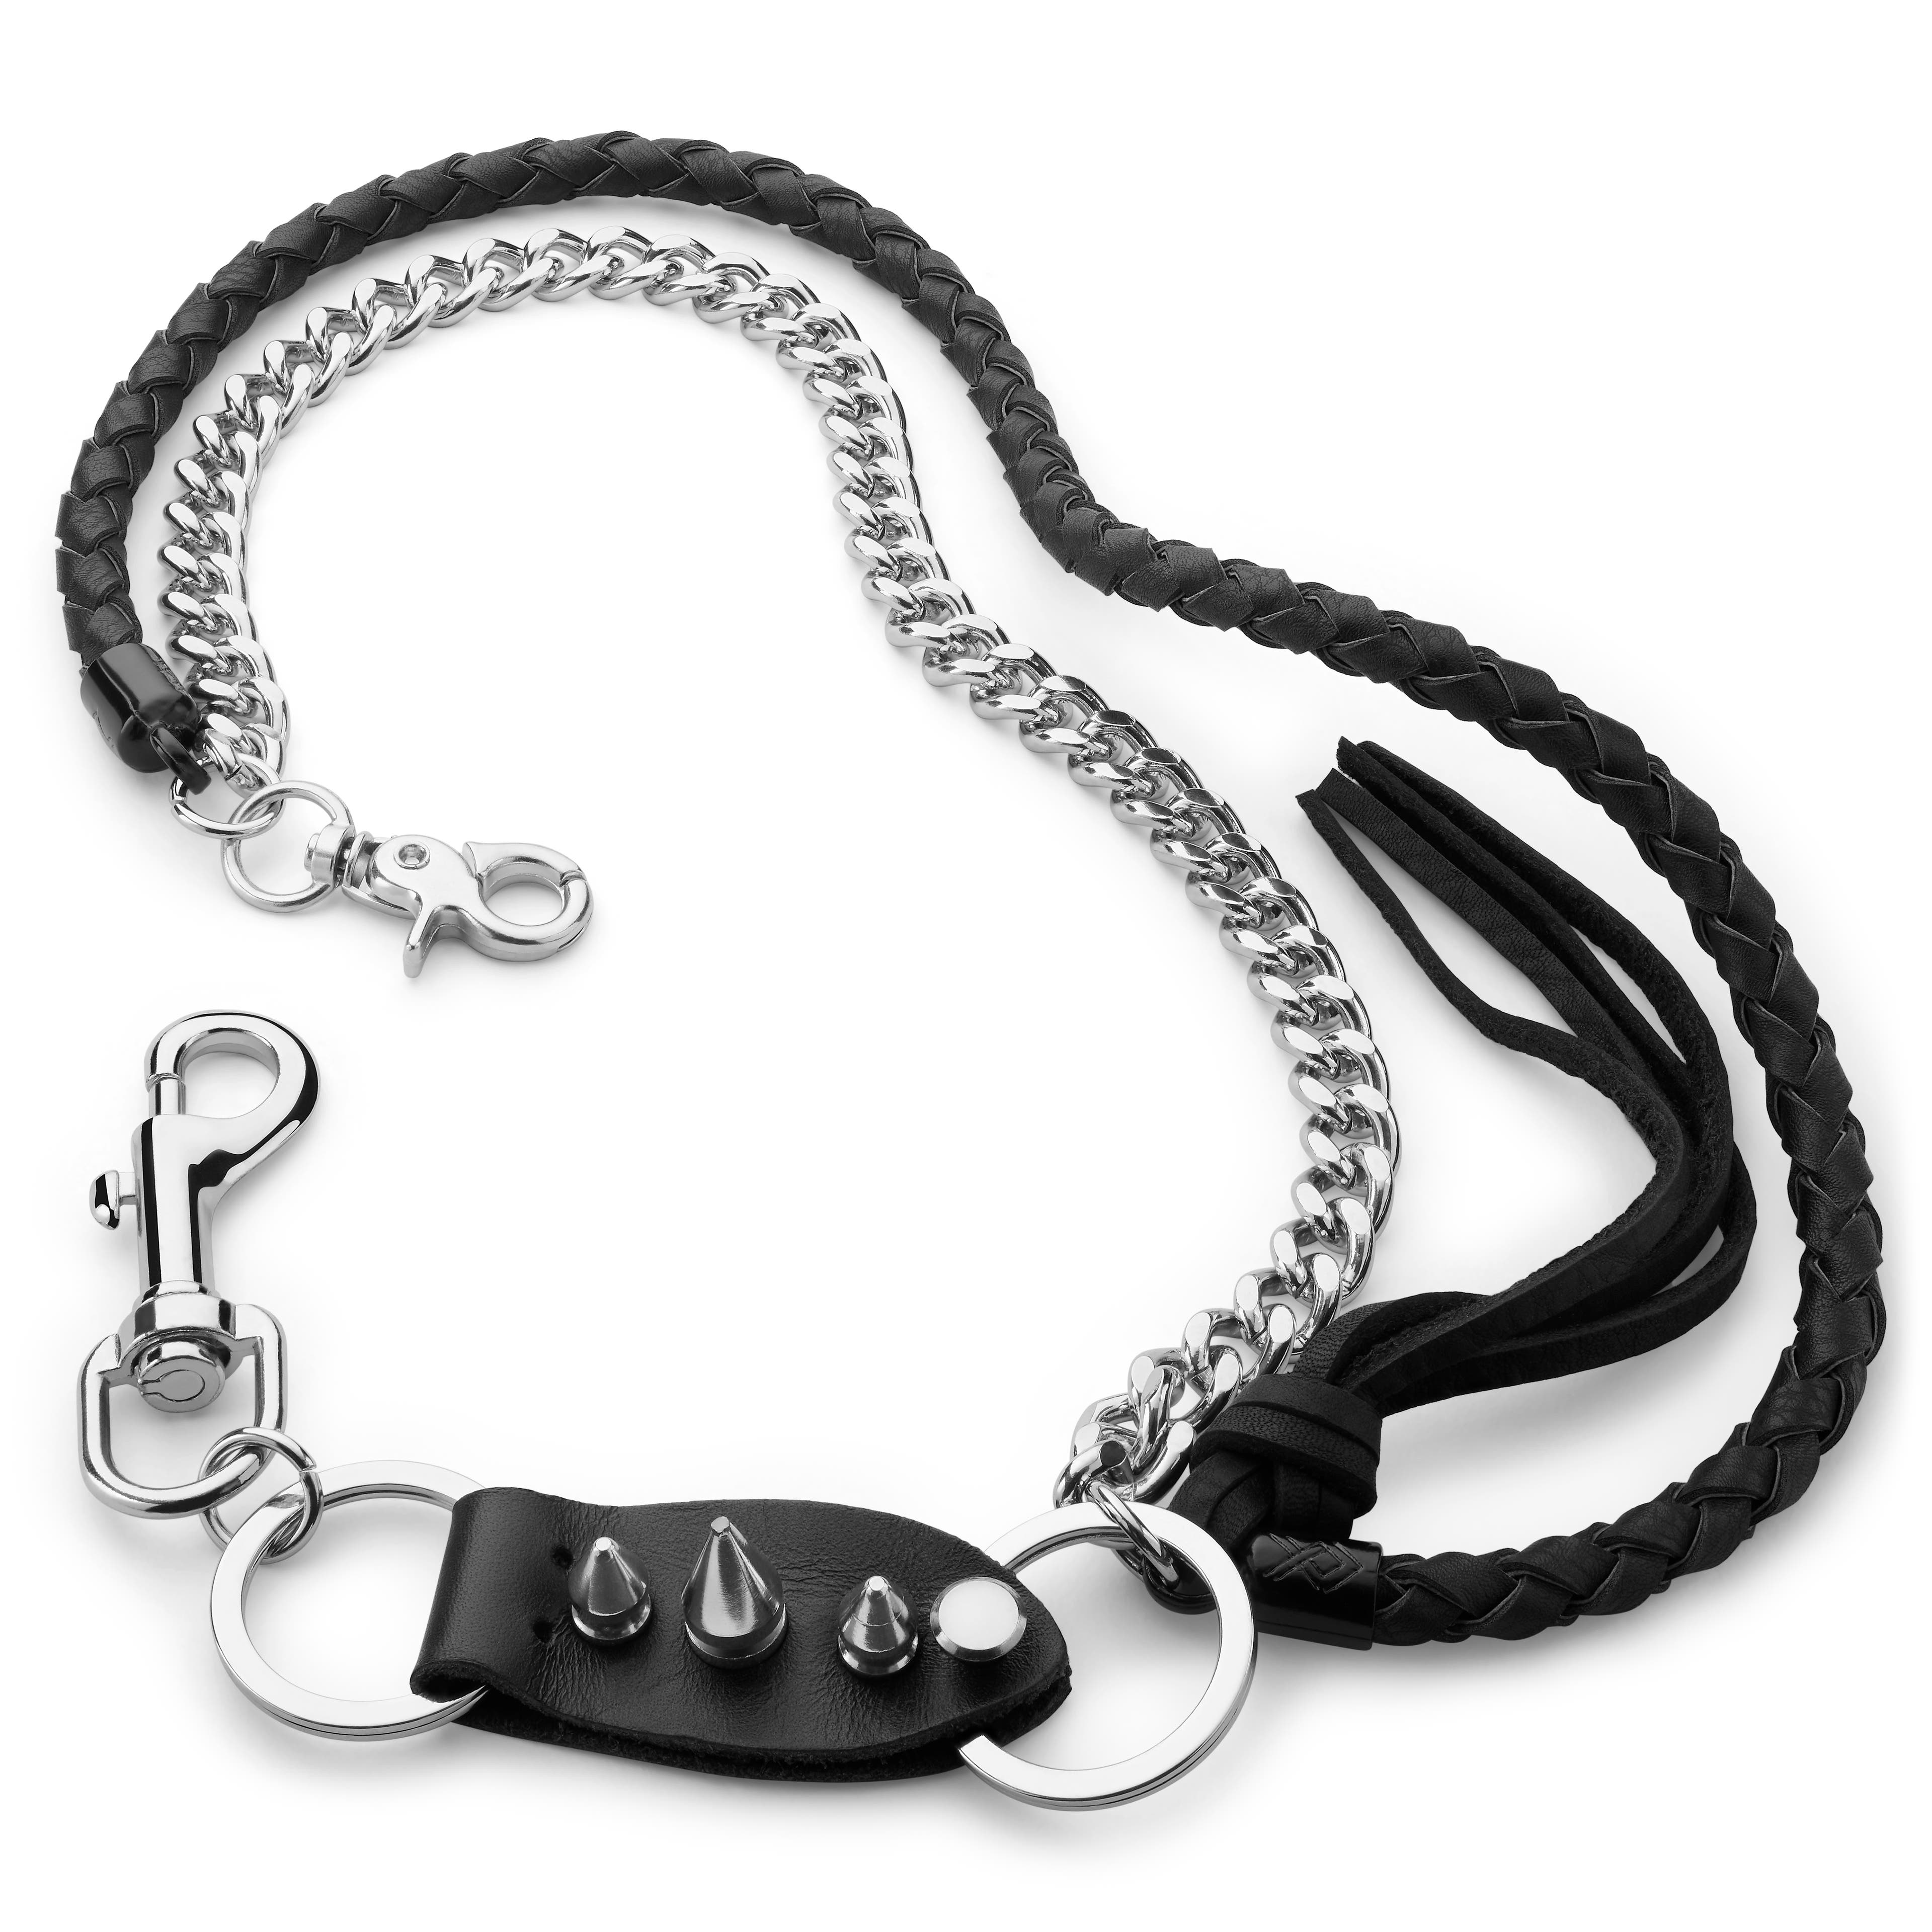 Wallet Chain Spiked Metal